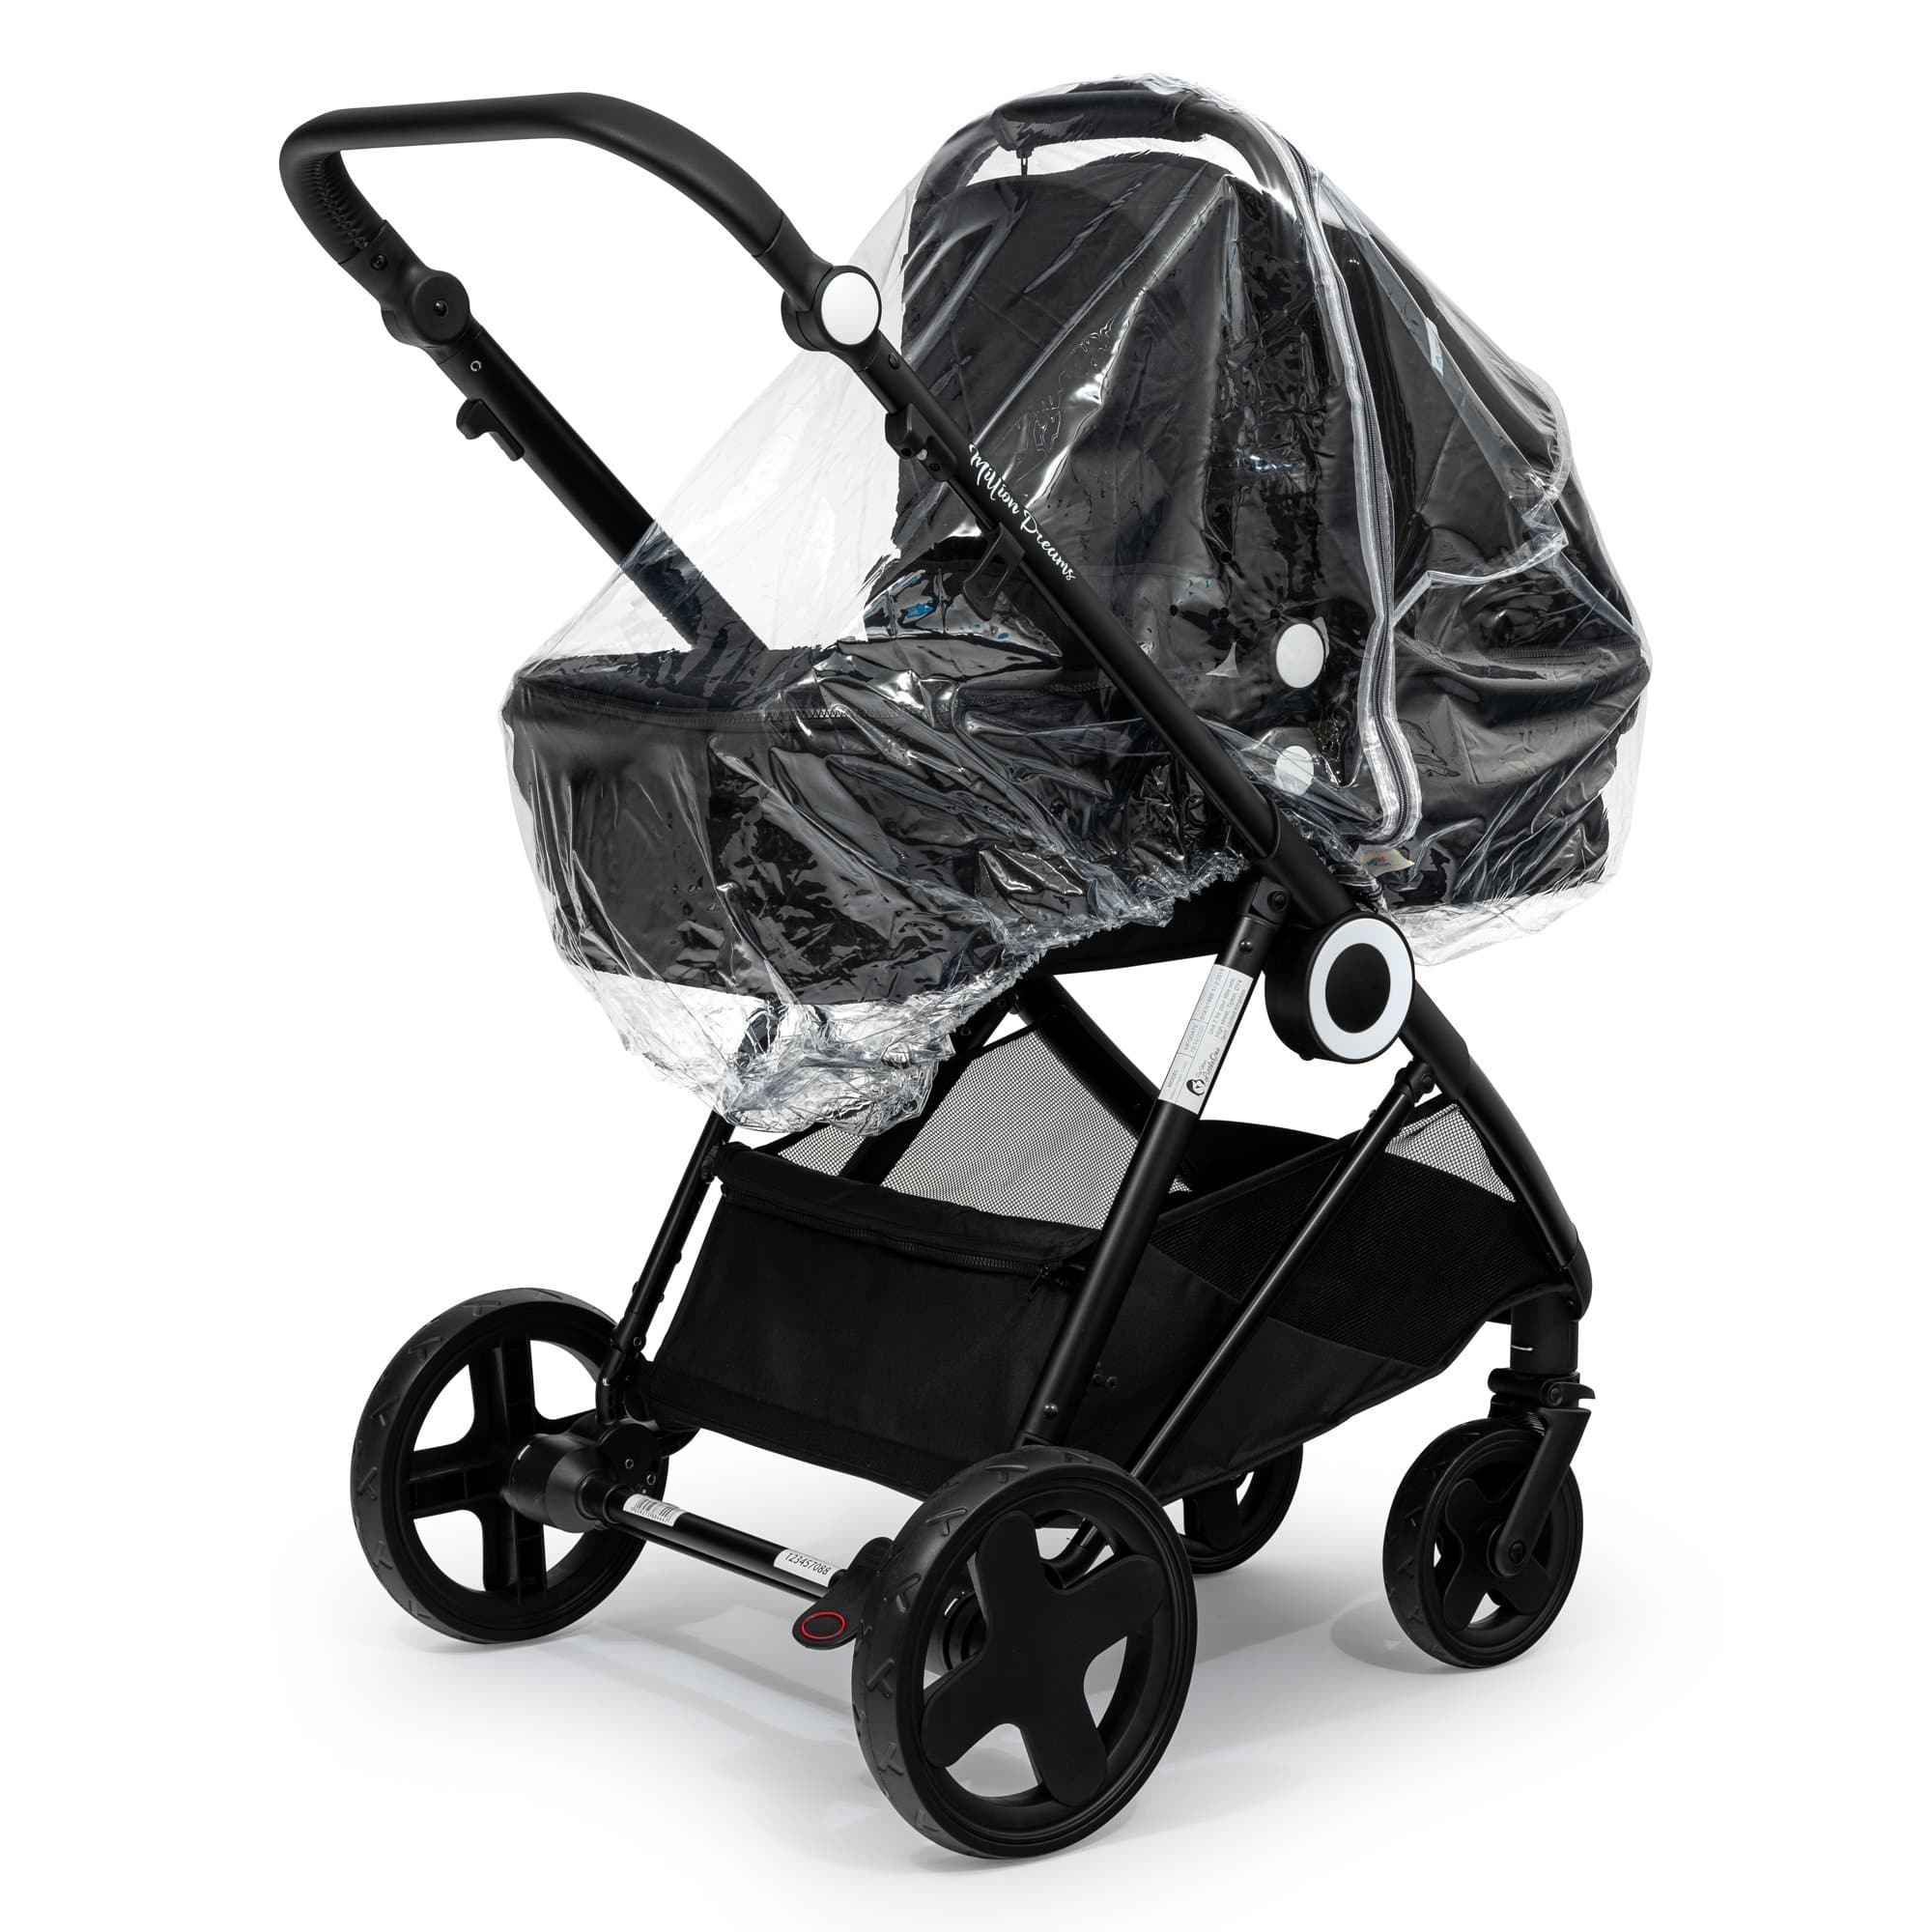 2 in 1 Rain Cover Compatible with BabyDan - Fits All Models - For Your Little One